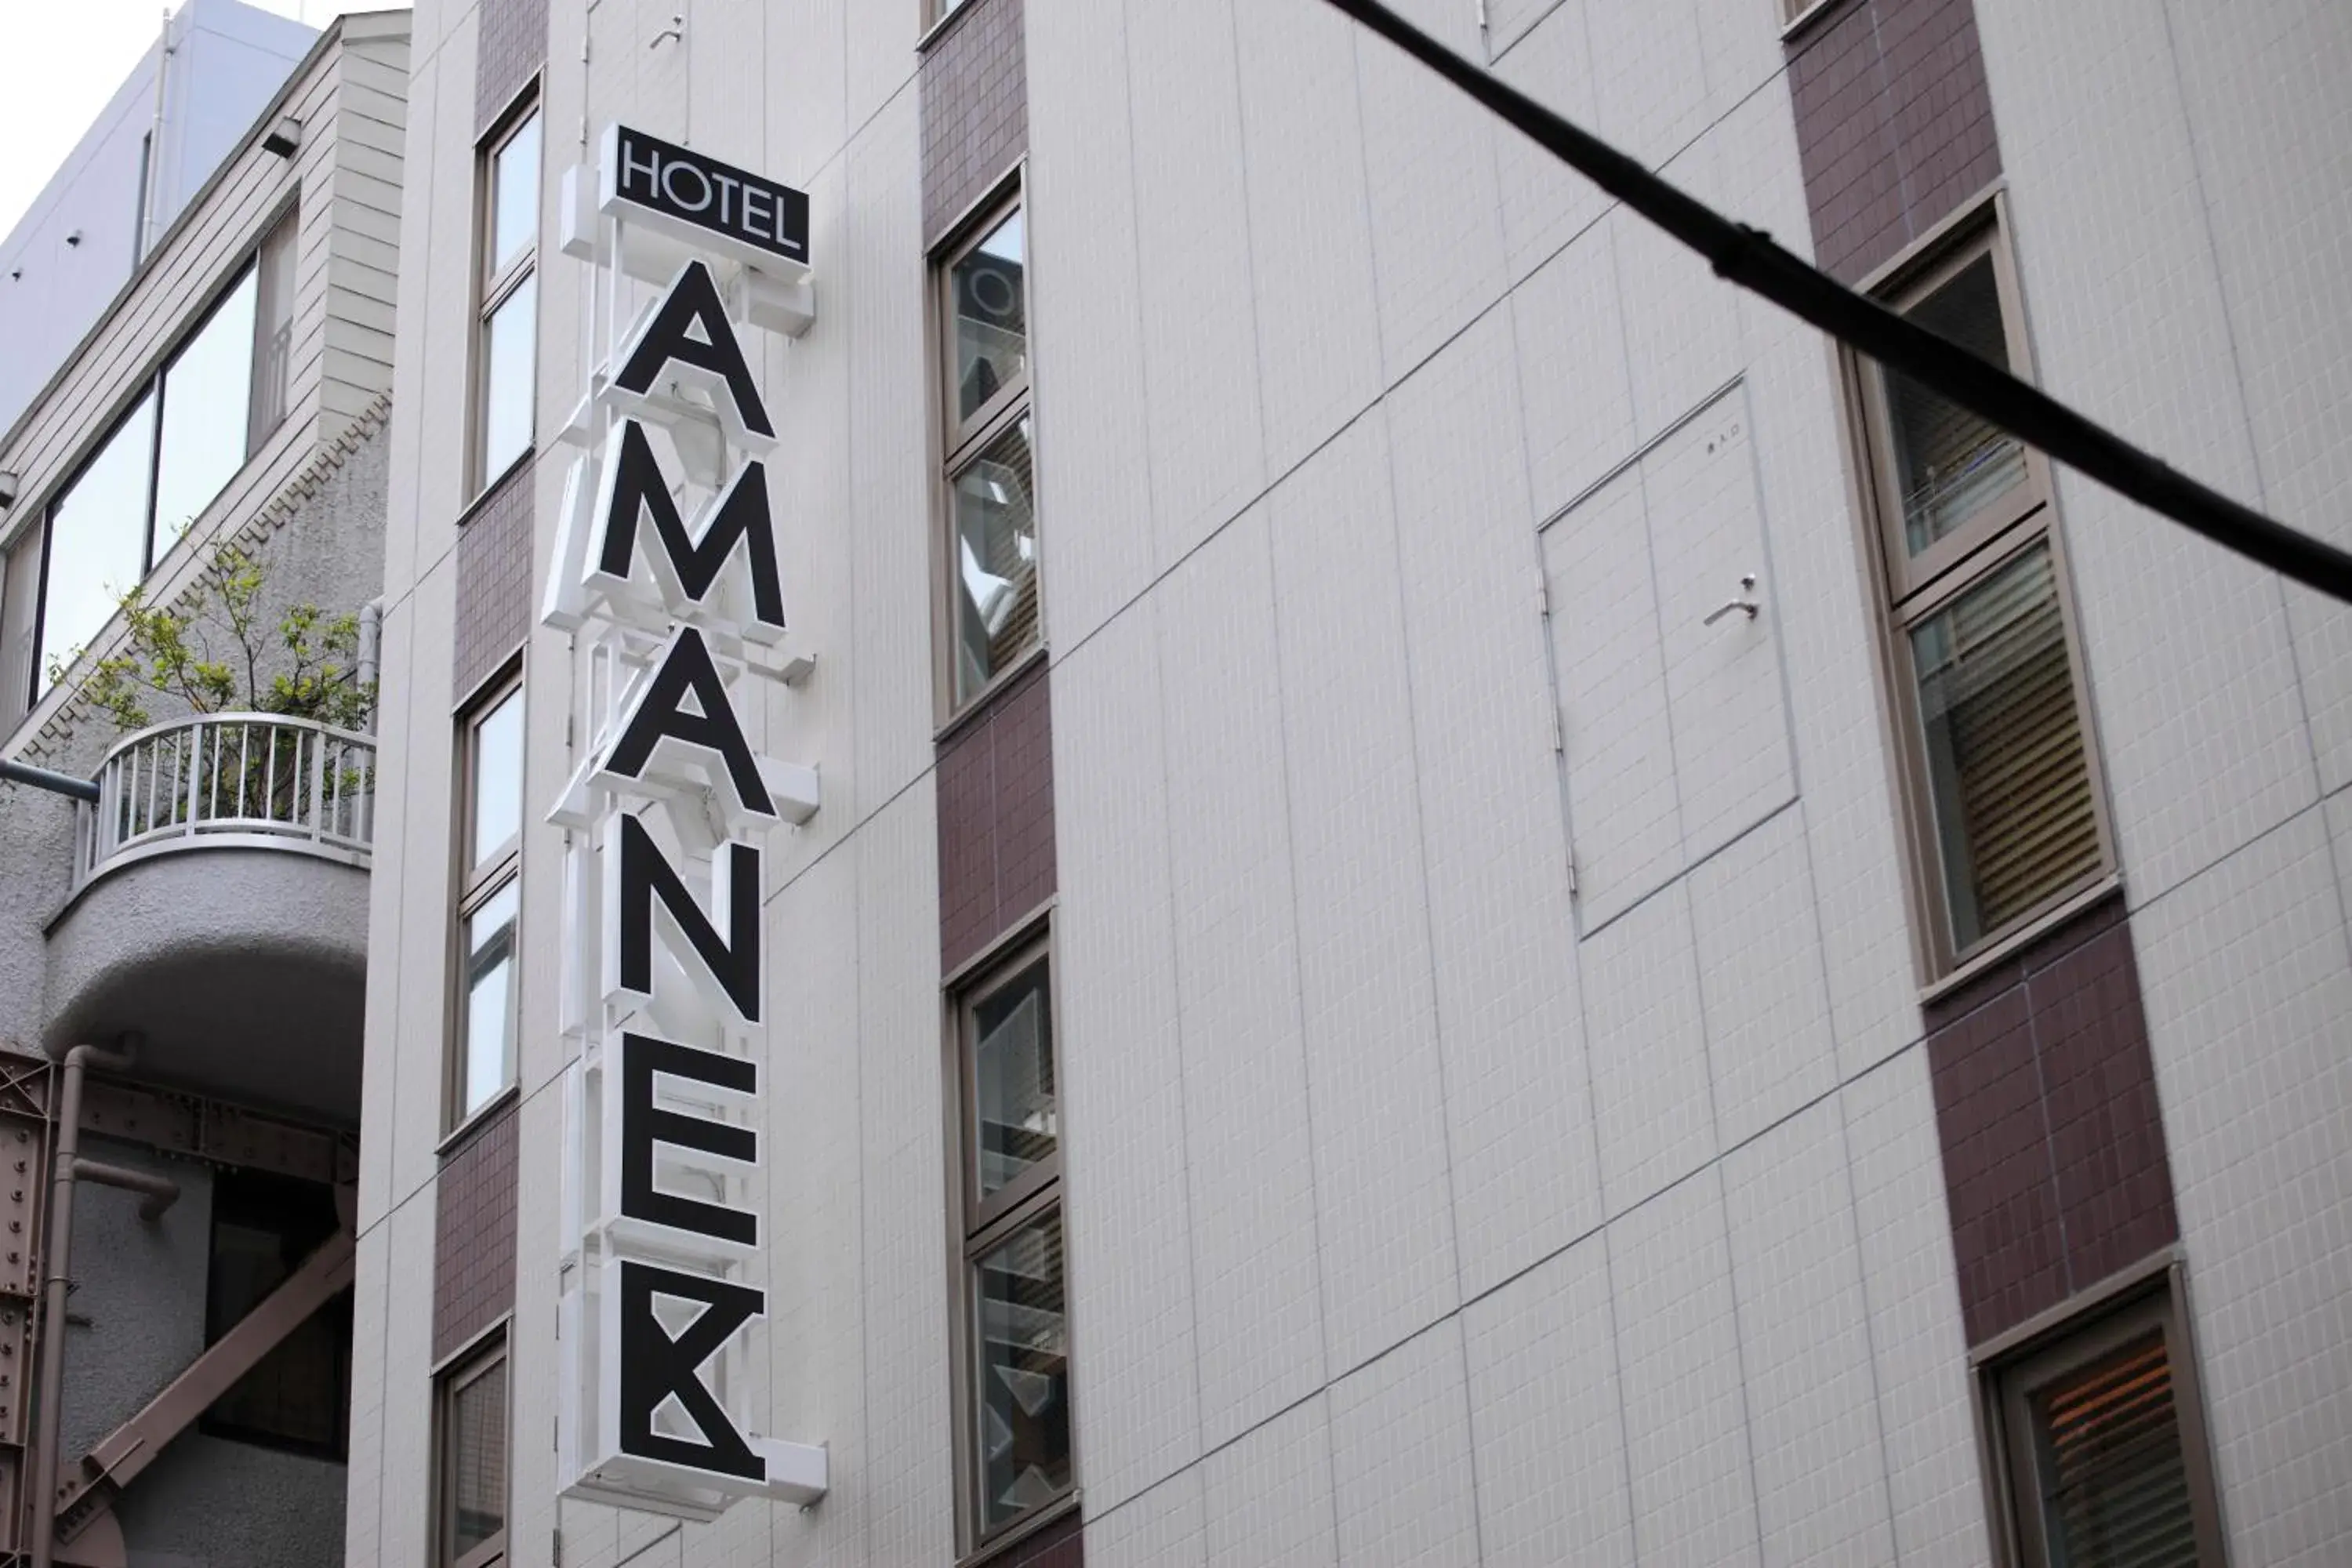 Property building, Bunk Bed in Hotel Amanek Ginza East